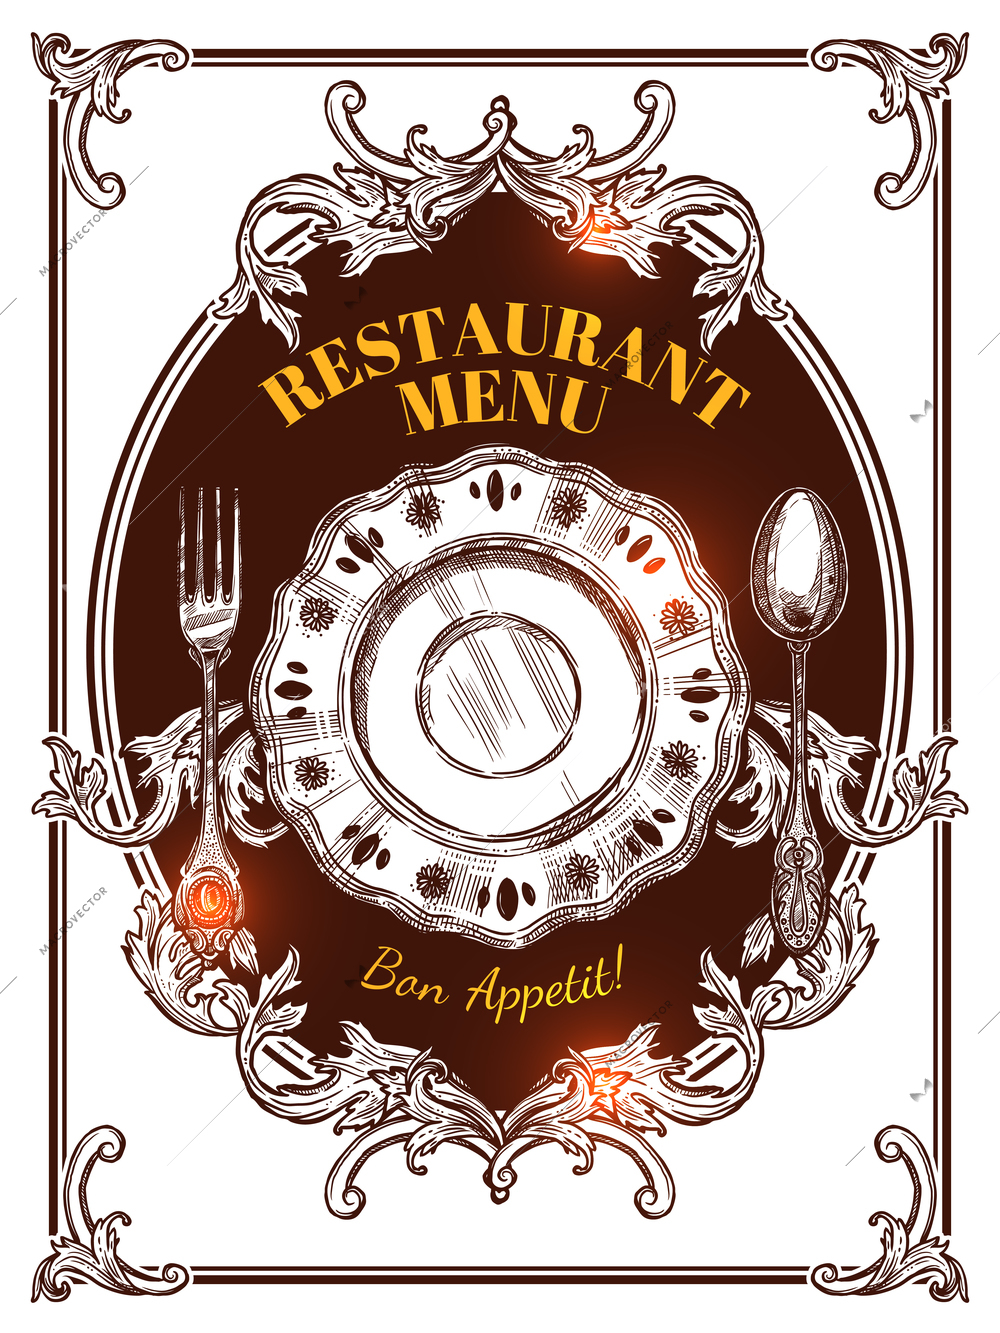 Restaurant menu hand drawn vintage cover with elements of serving and wishes for good appetite vector illustration